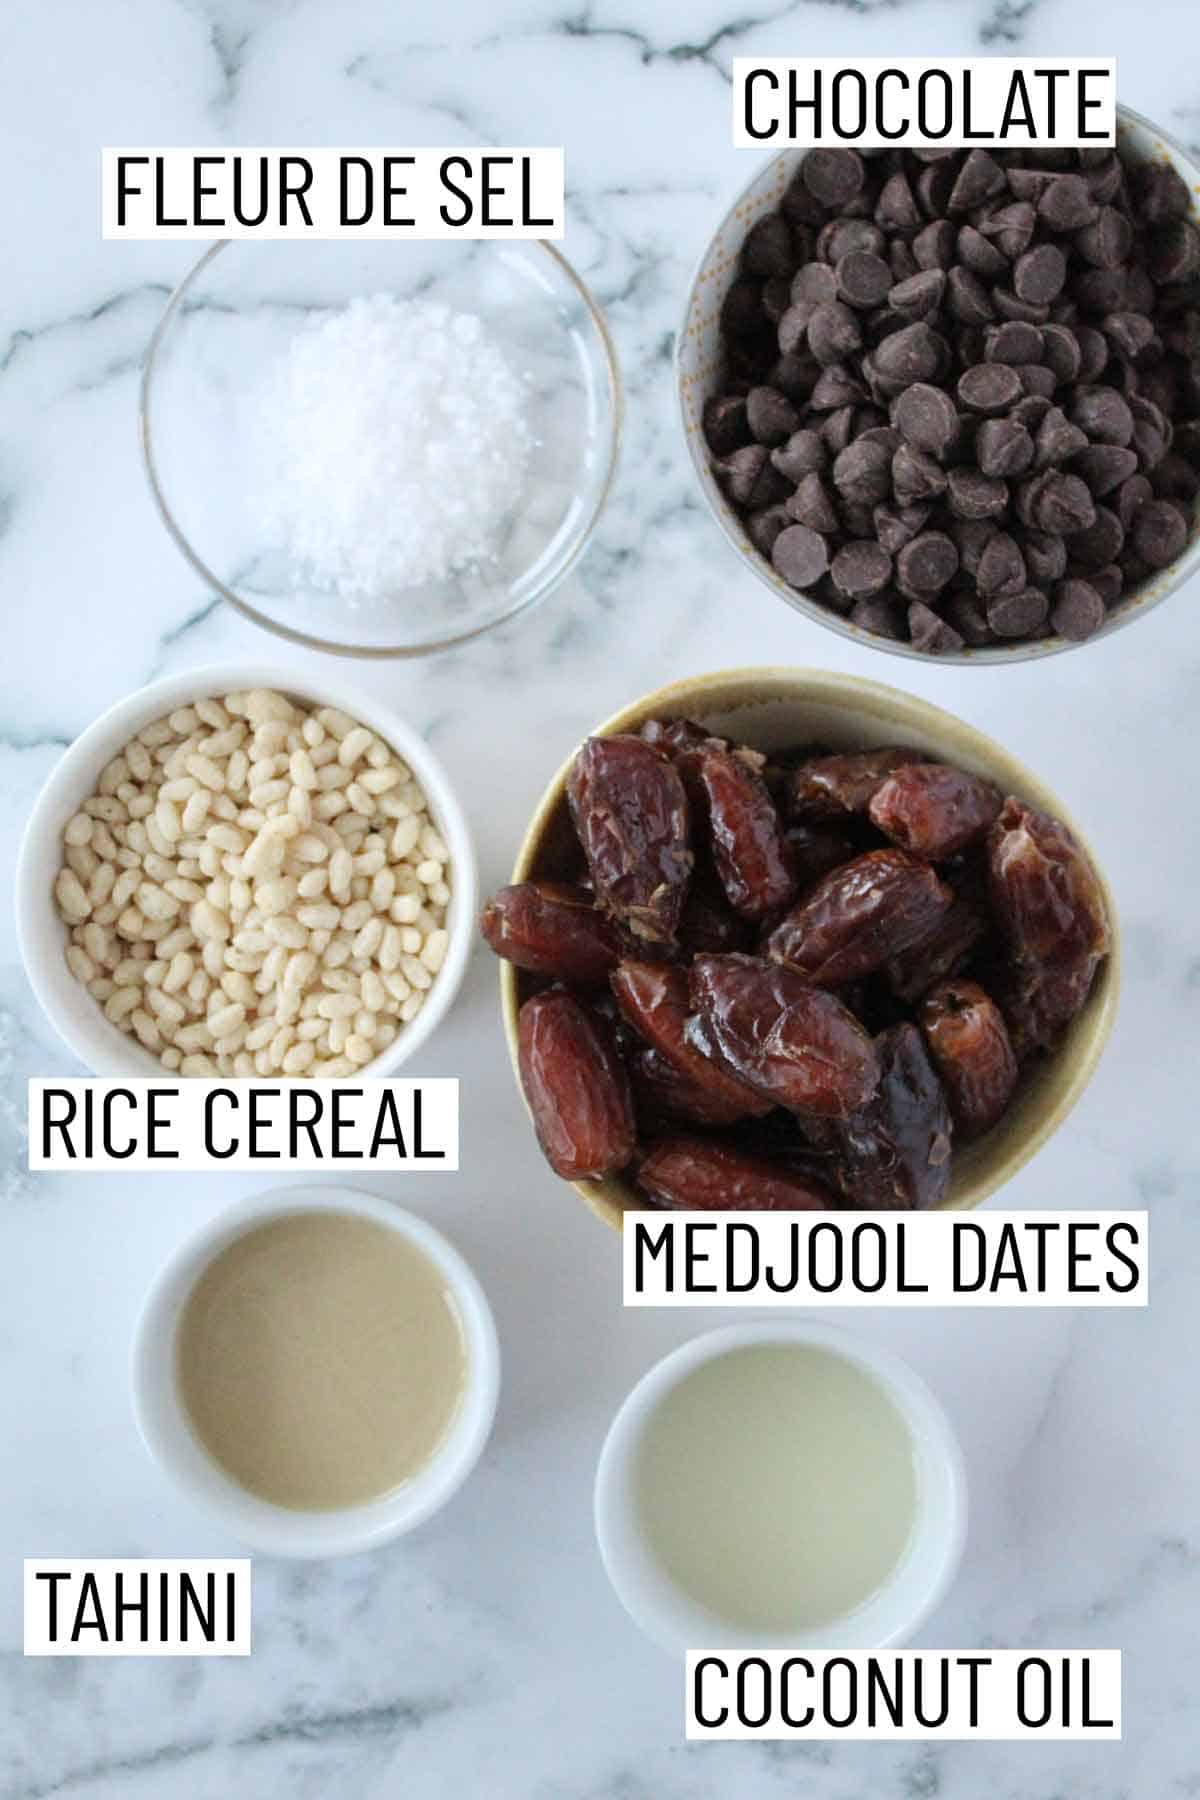 Ingredients needed to make Caramel Truffles with Tahini and Dates.